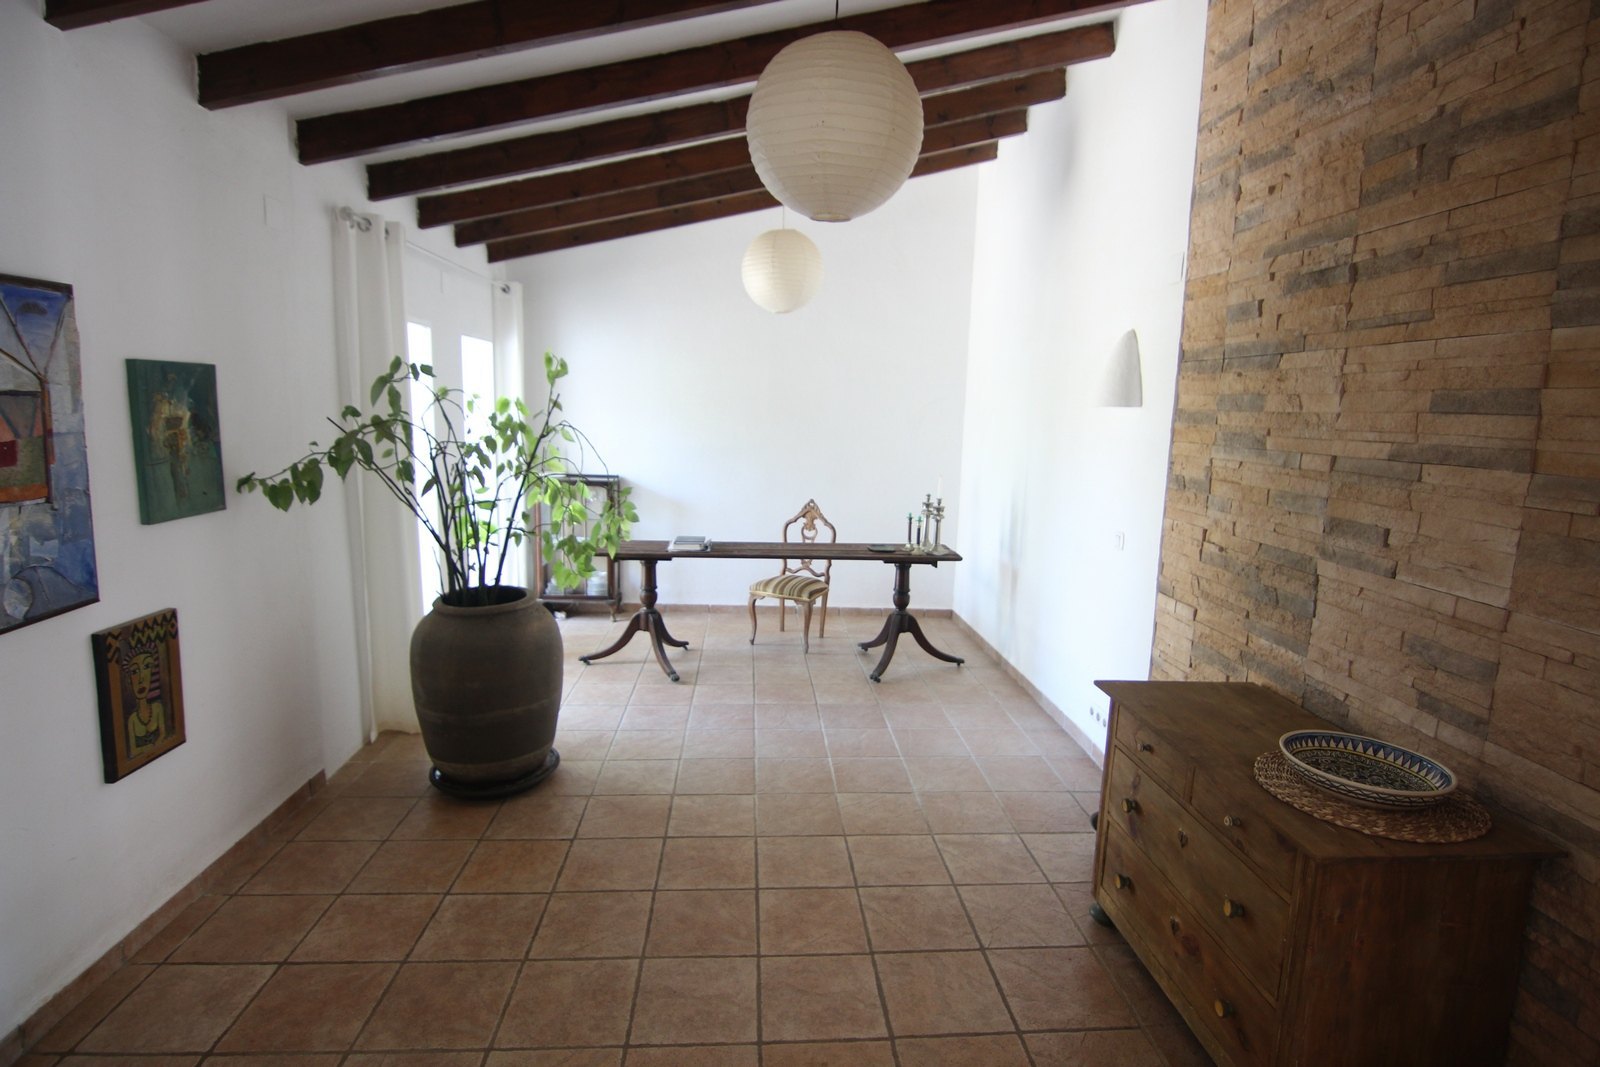 Refurbished Finca for sale with separate suite for guess and swimming pool in Javeas country site.